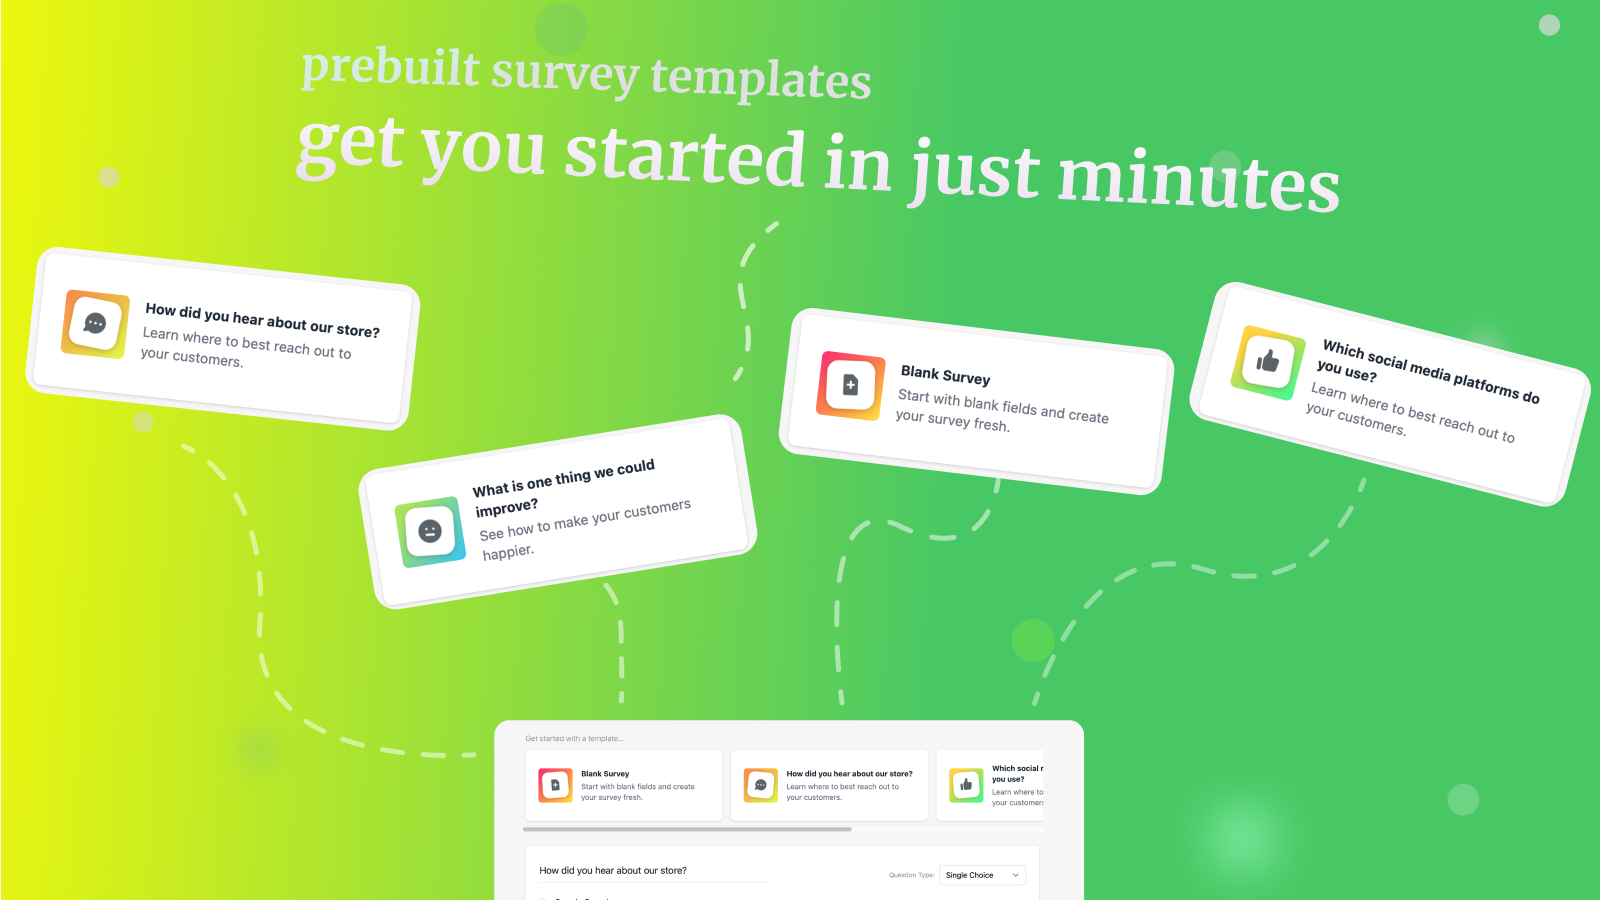 prebuilt survey templates get you started in just minutes